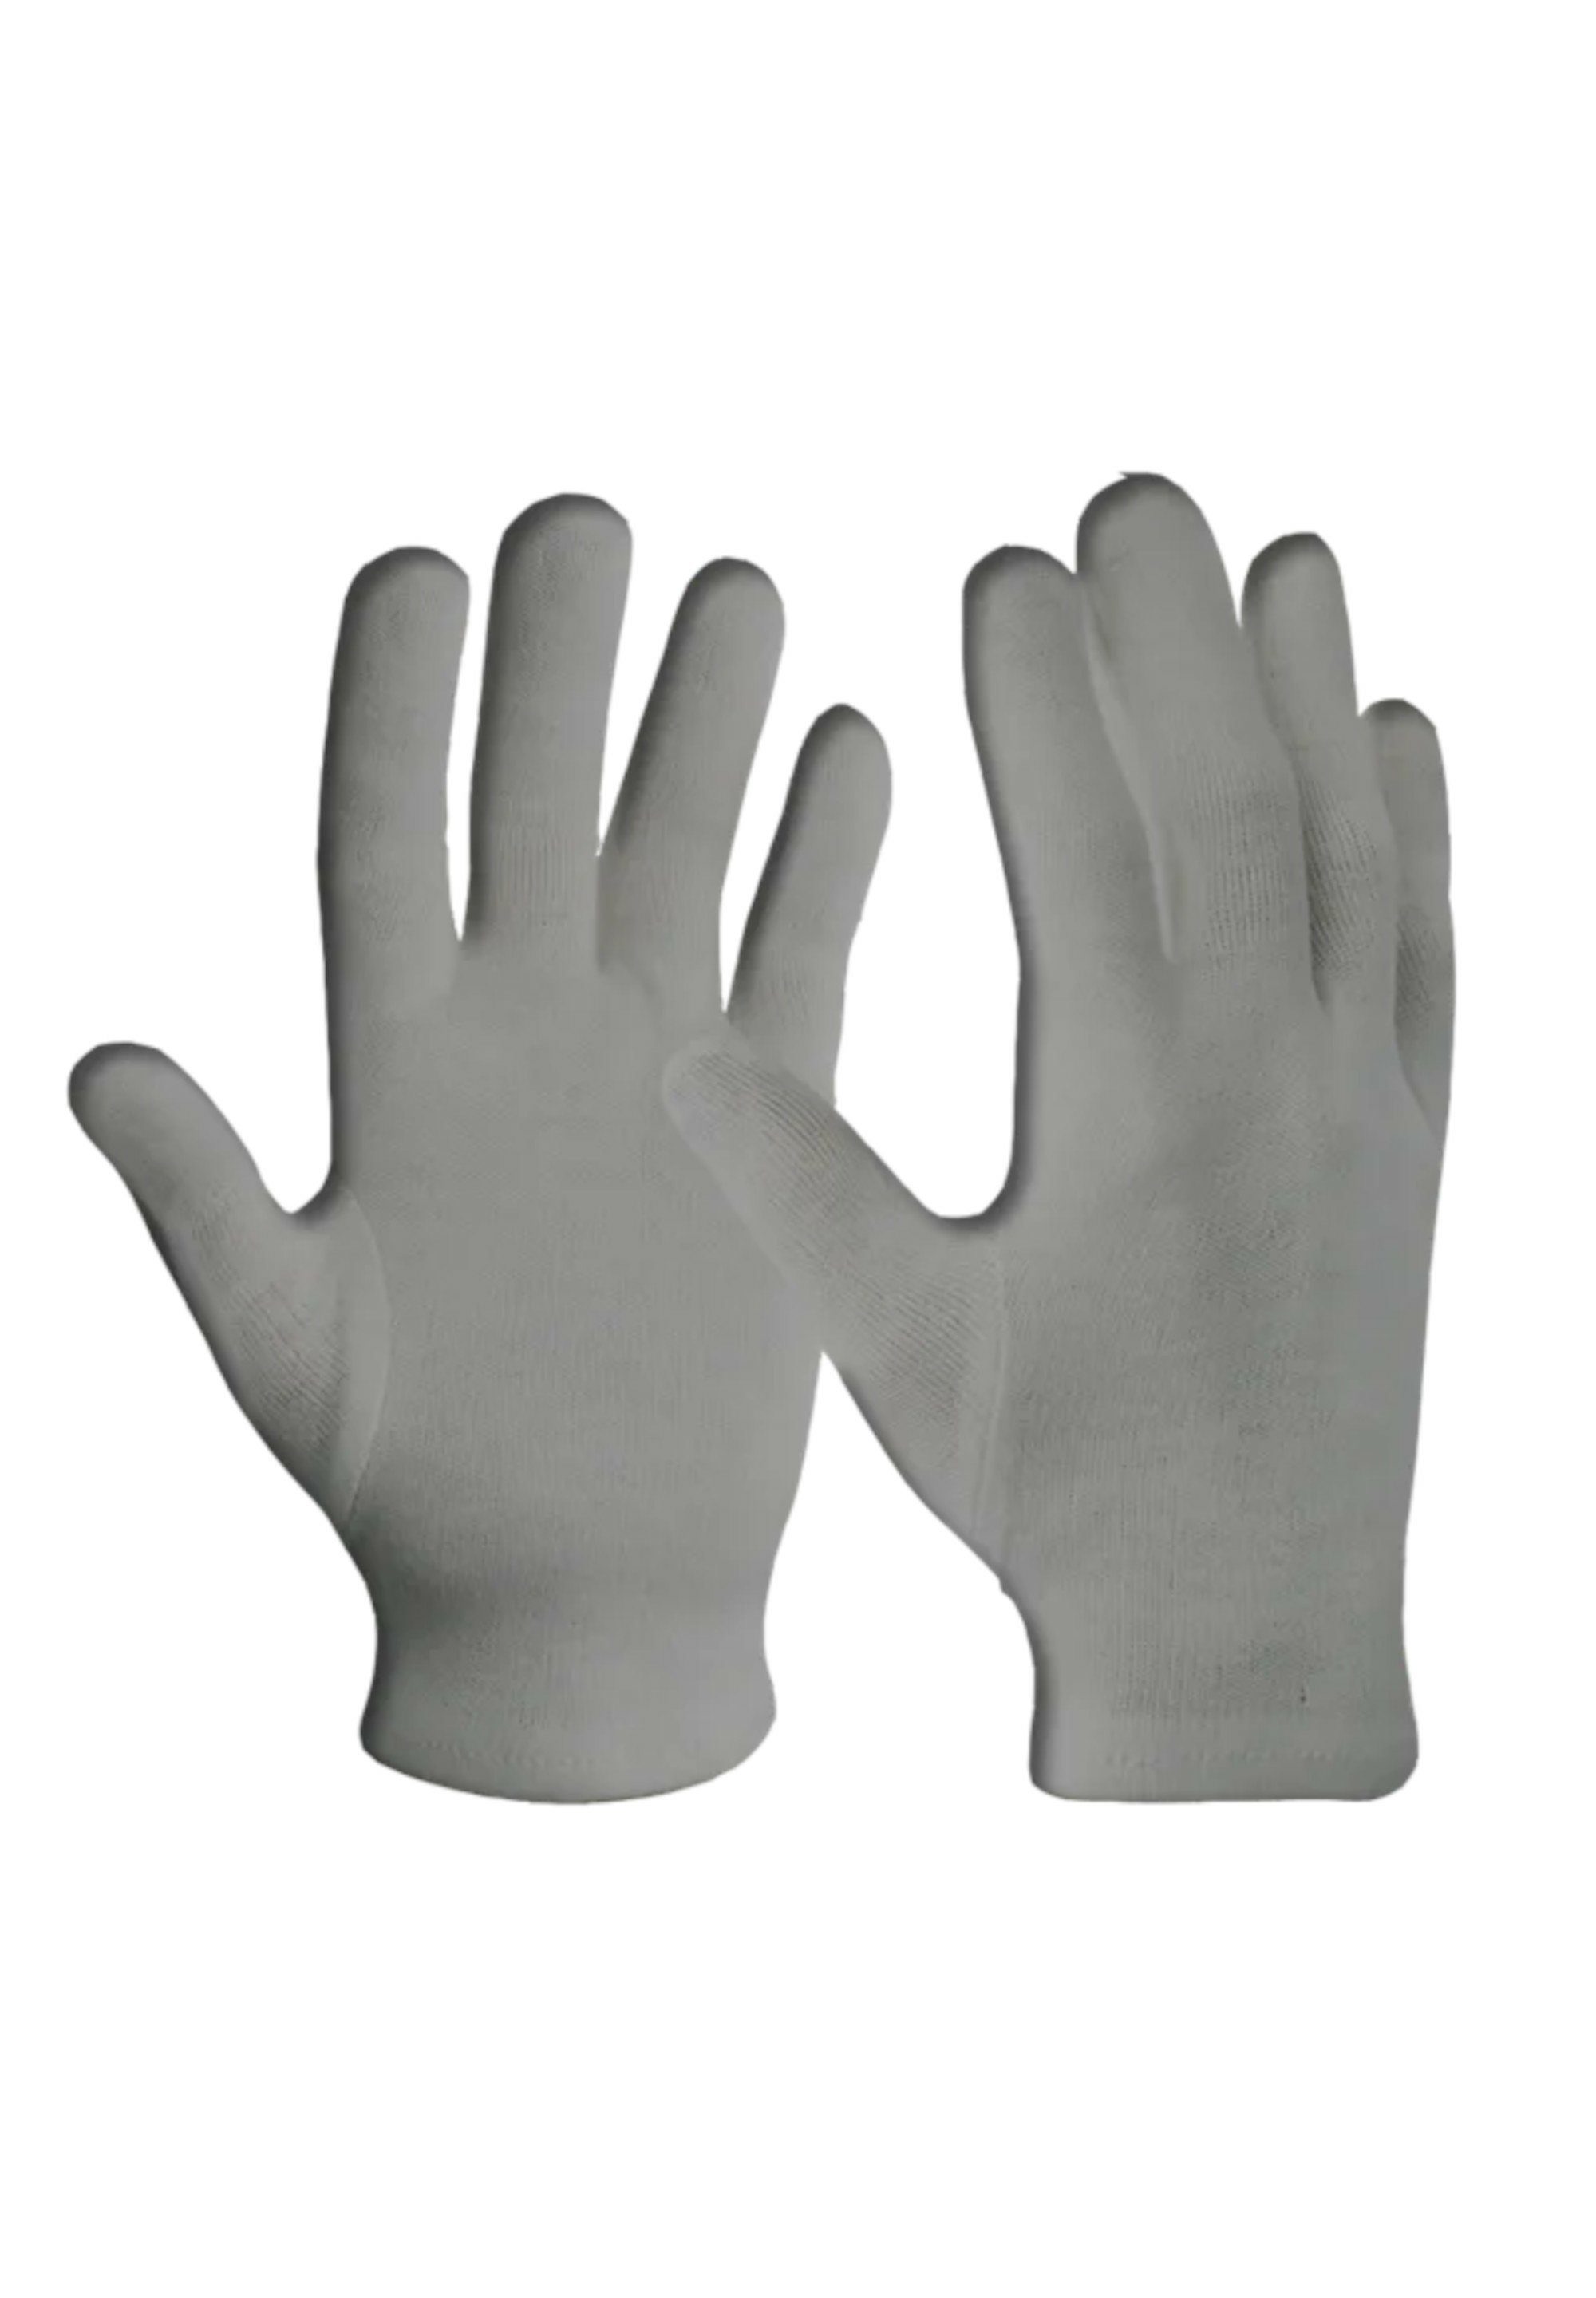 Zanier Multisporthandschuhe ANTIMICROBIAL PROTECTIVE We on focus GLOVE gloves